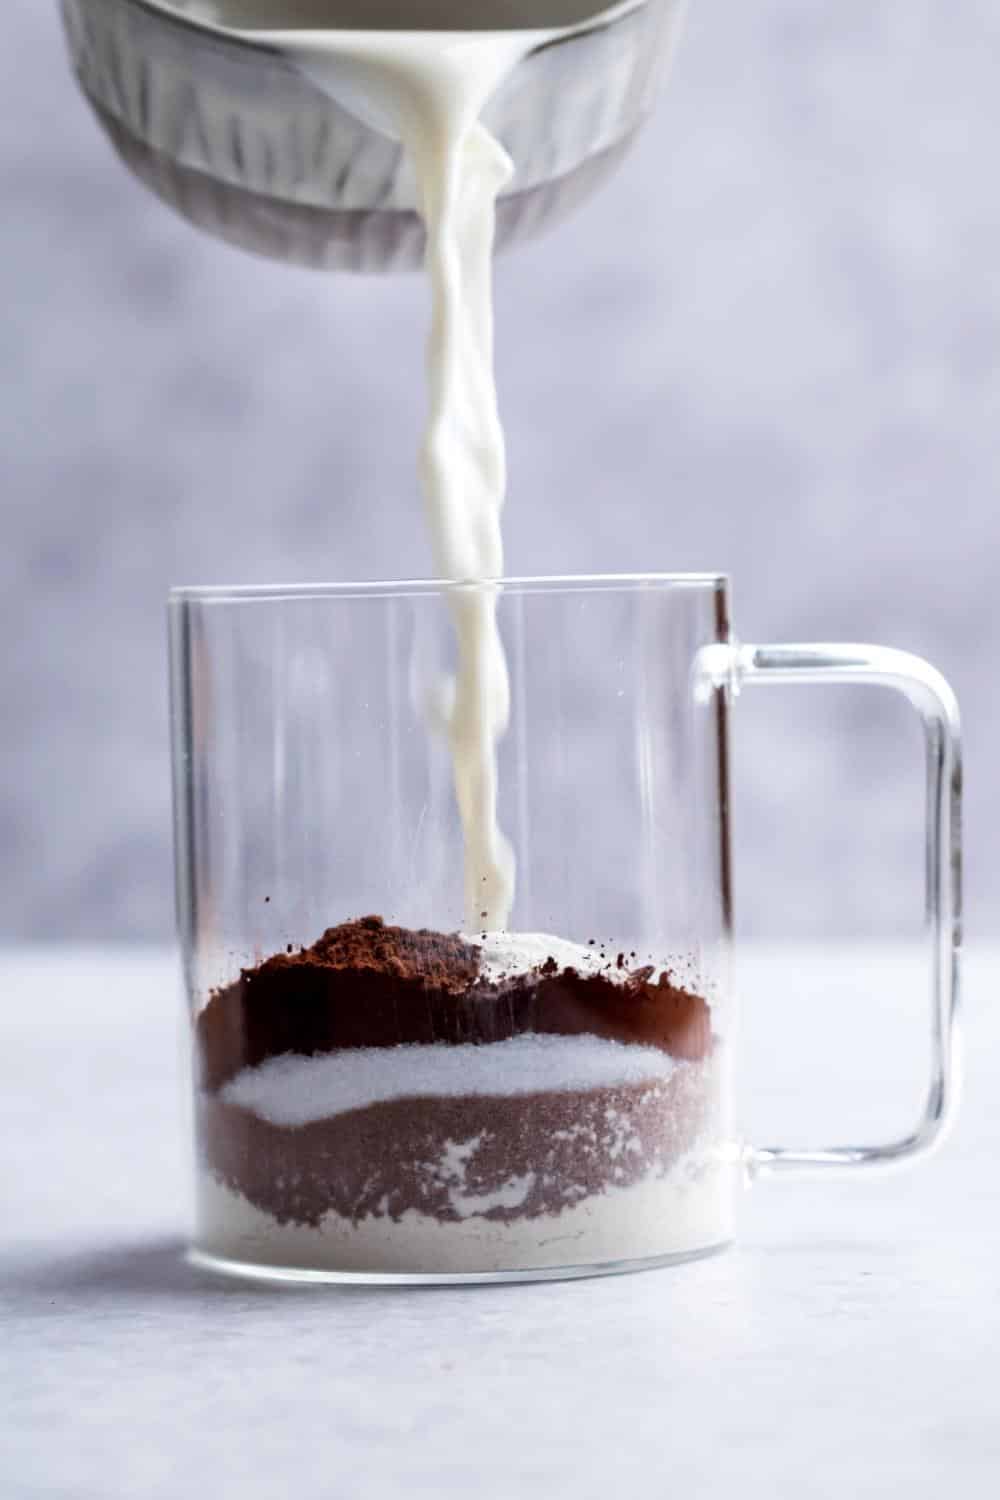 Milk being poured into a glass mug that is filled with cocoa powder, chocolate protein powder, and oat flour.